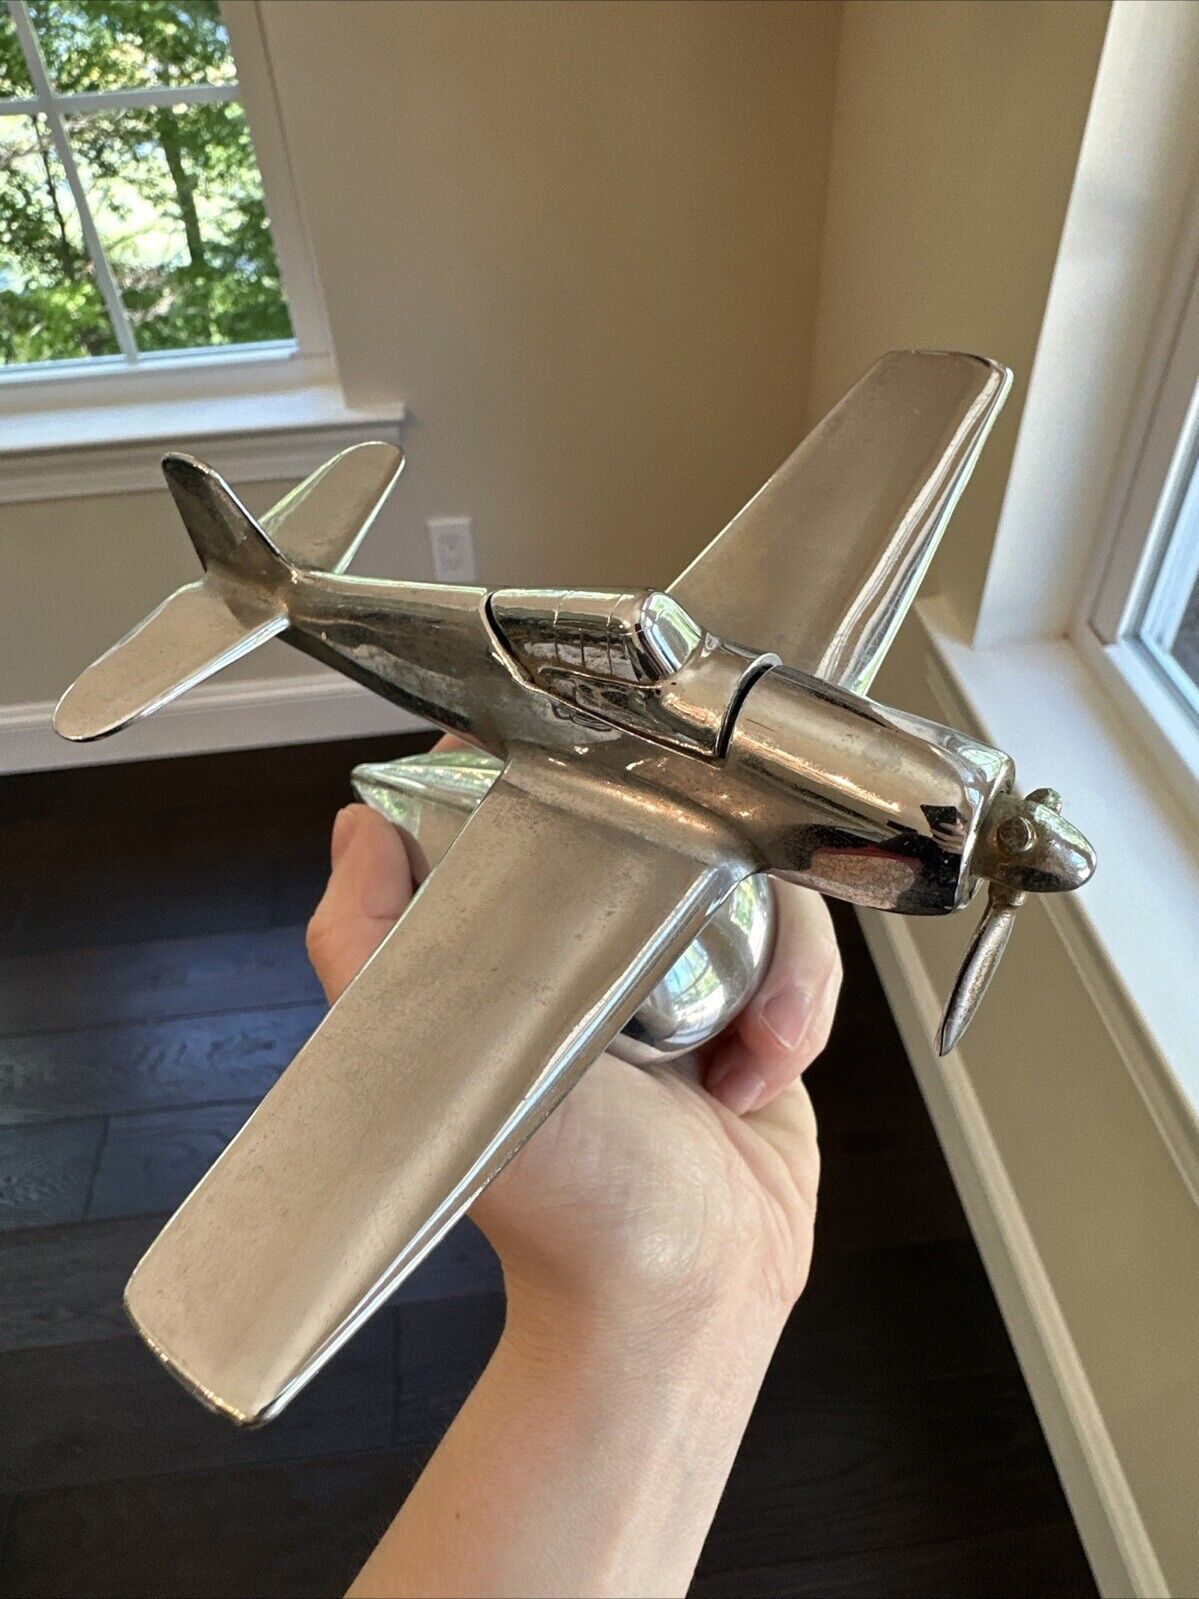 1940s F6 Hellcat Chrome Finished Airplane Table Lighter, Missing 2 Propellers